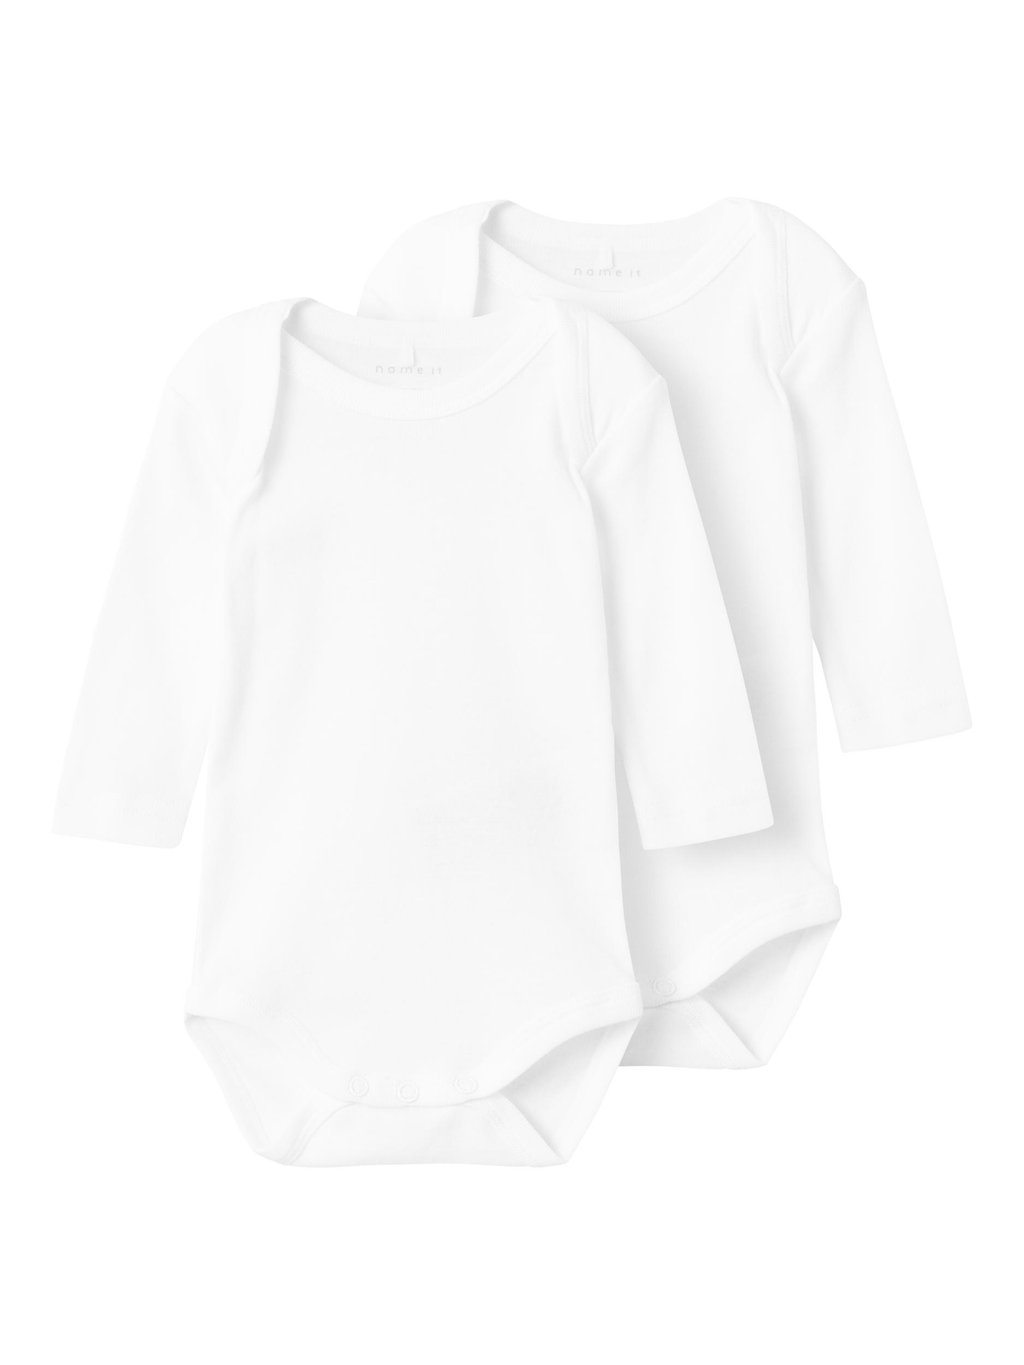 Боди Nbnbody Solid Unisex 2 Pack Name it, цвет bright white